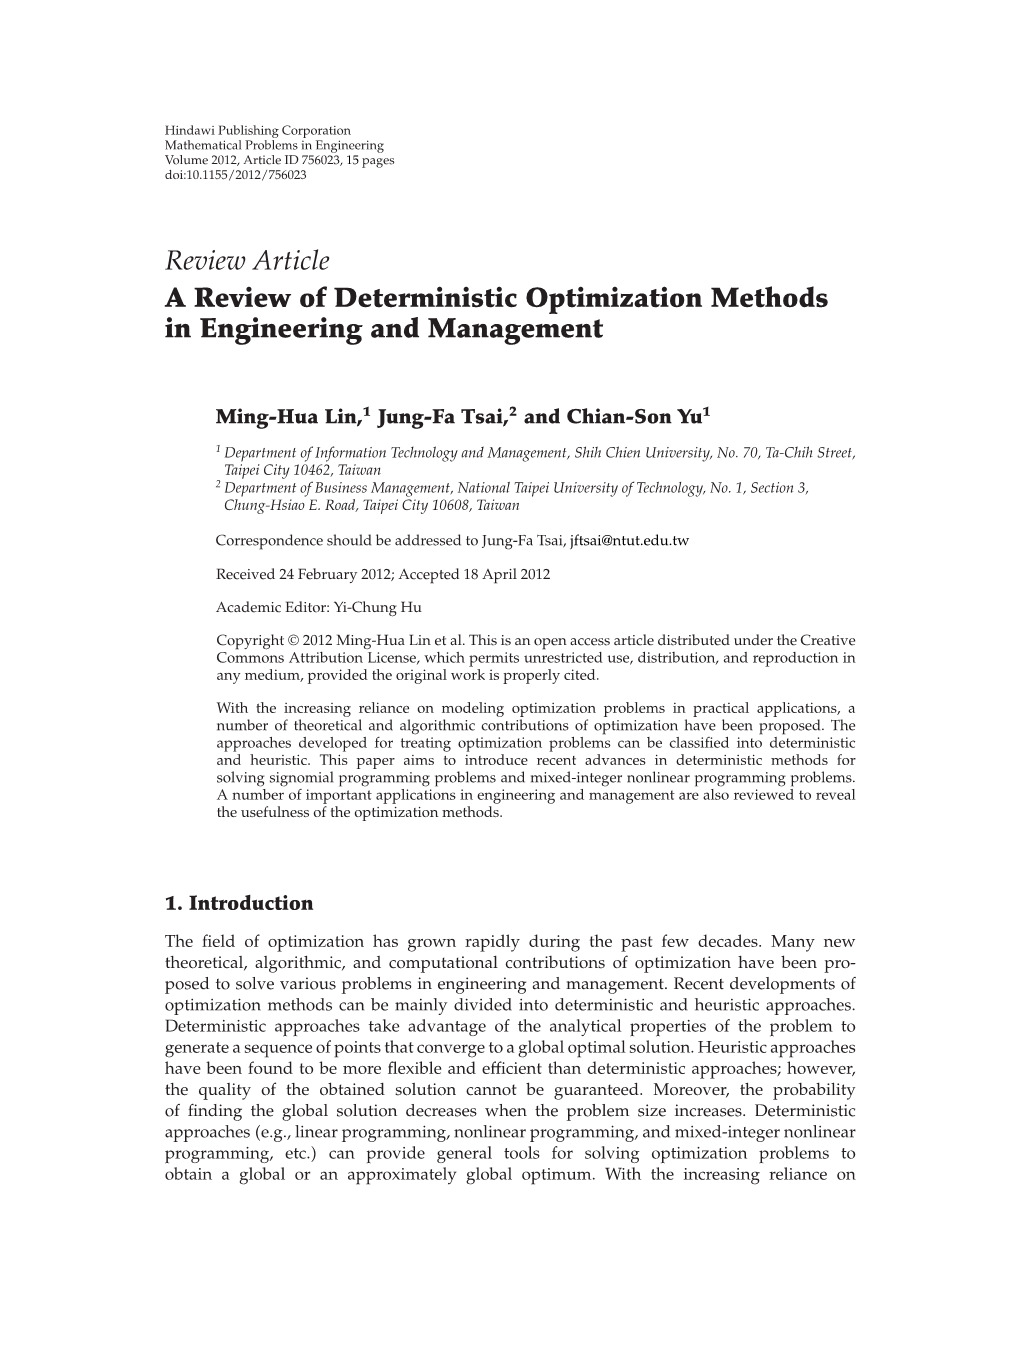 Review Article a Review of Deterministic Optimization Methods in Engineering and Management